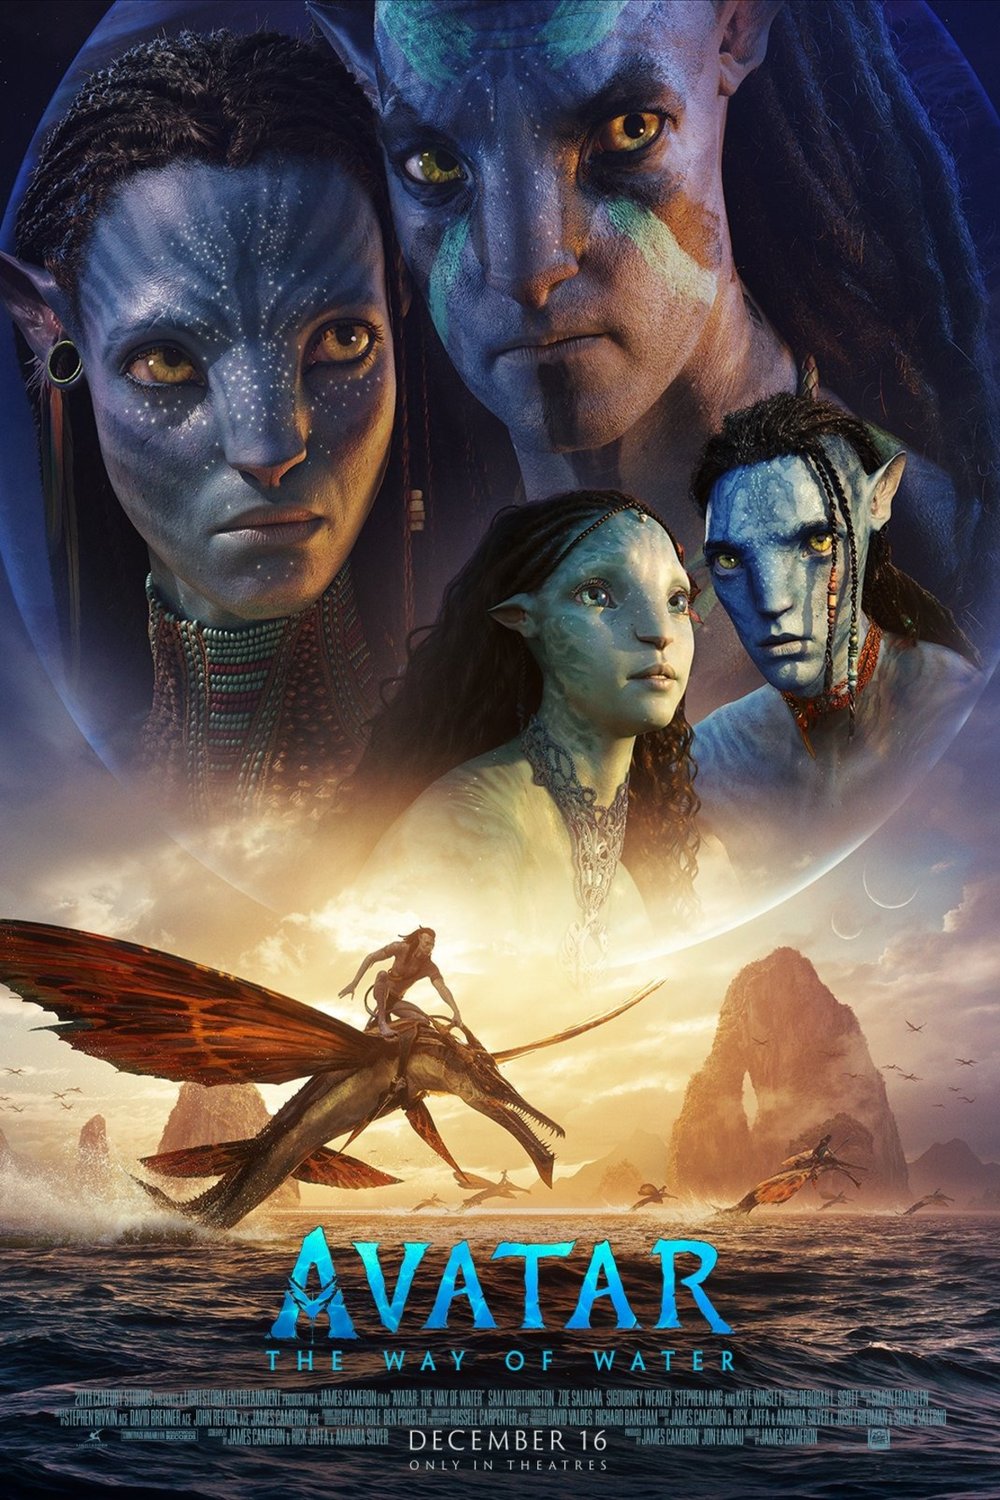 Avatar The Way of Water (2022) by James Cameron